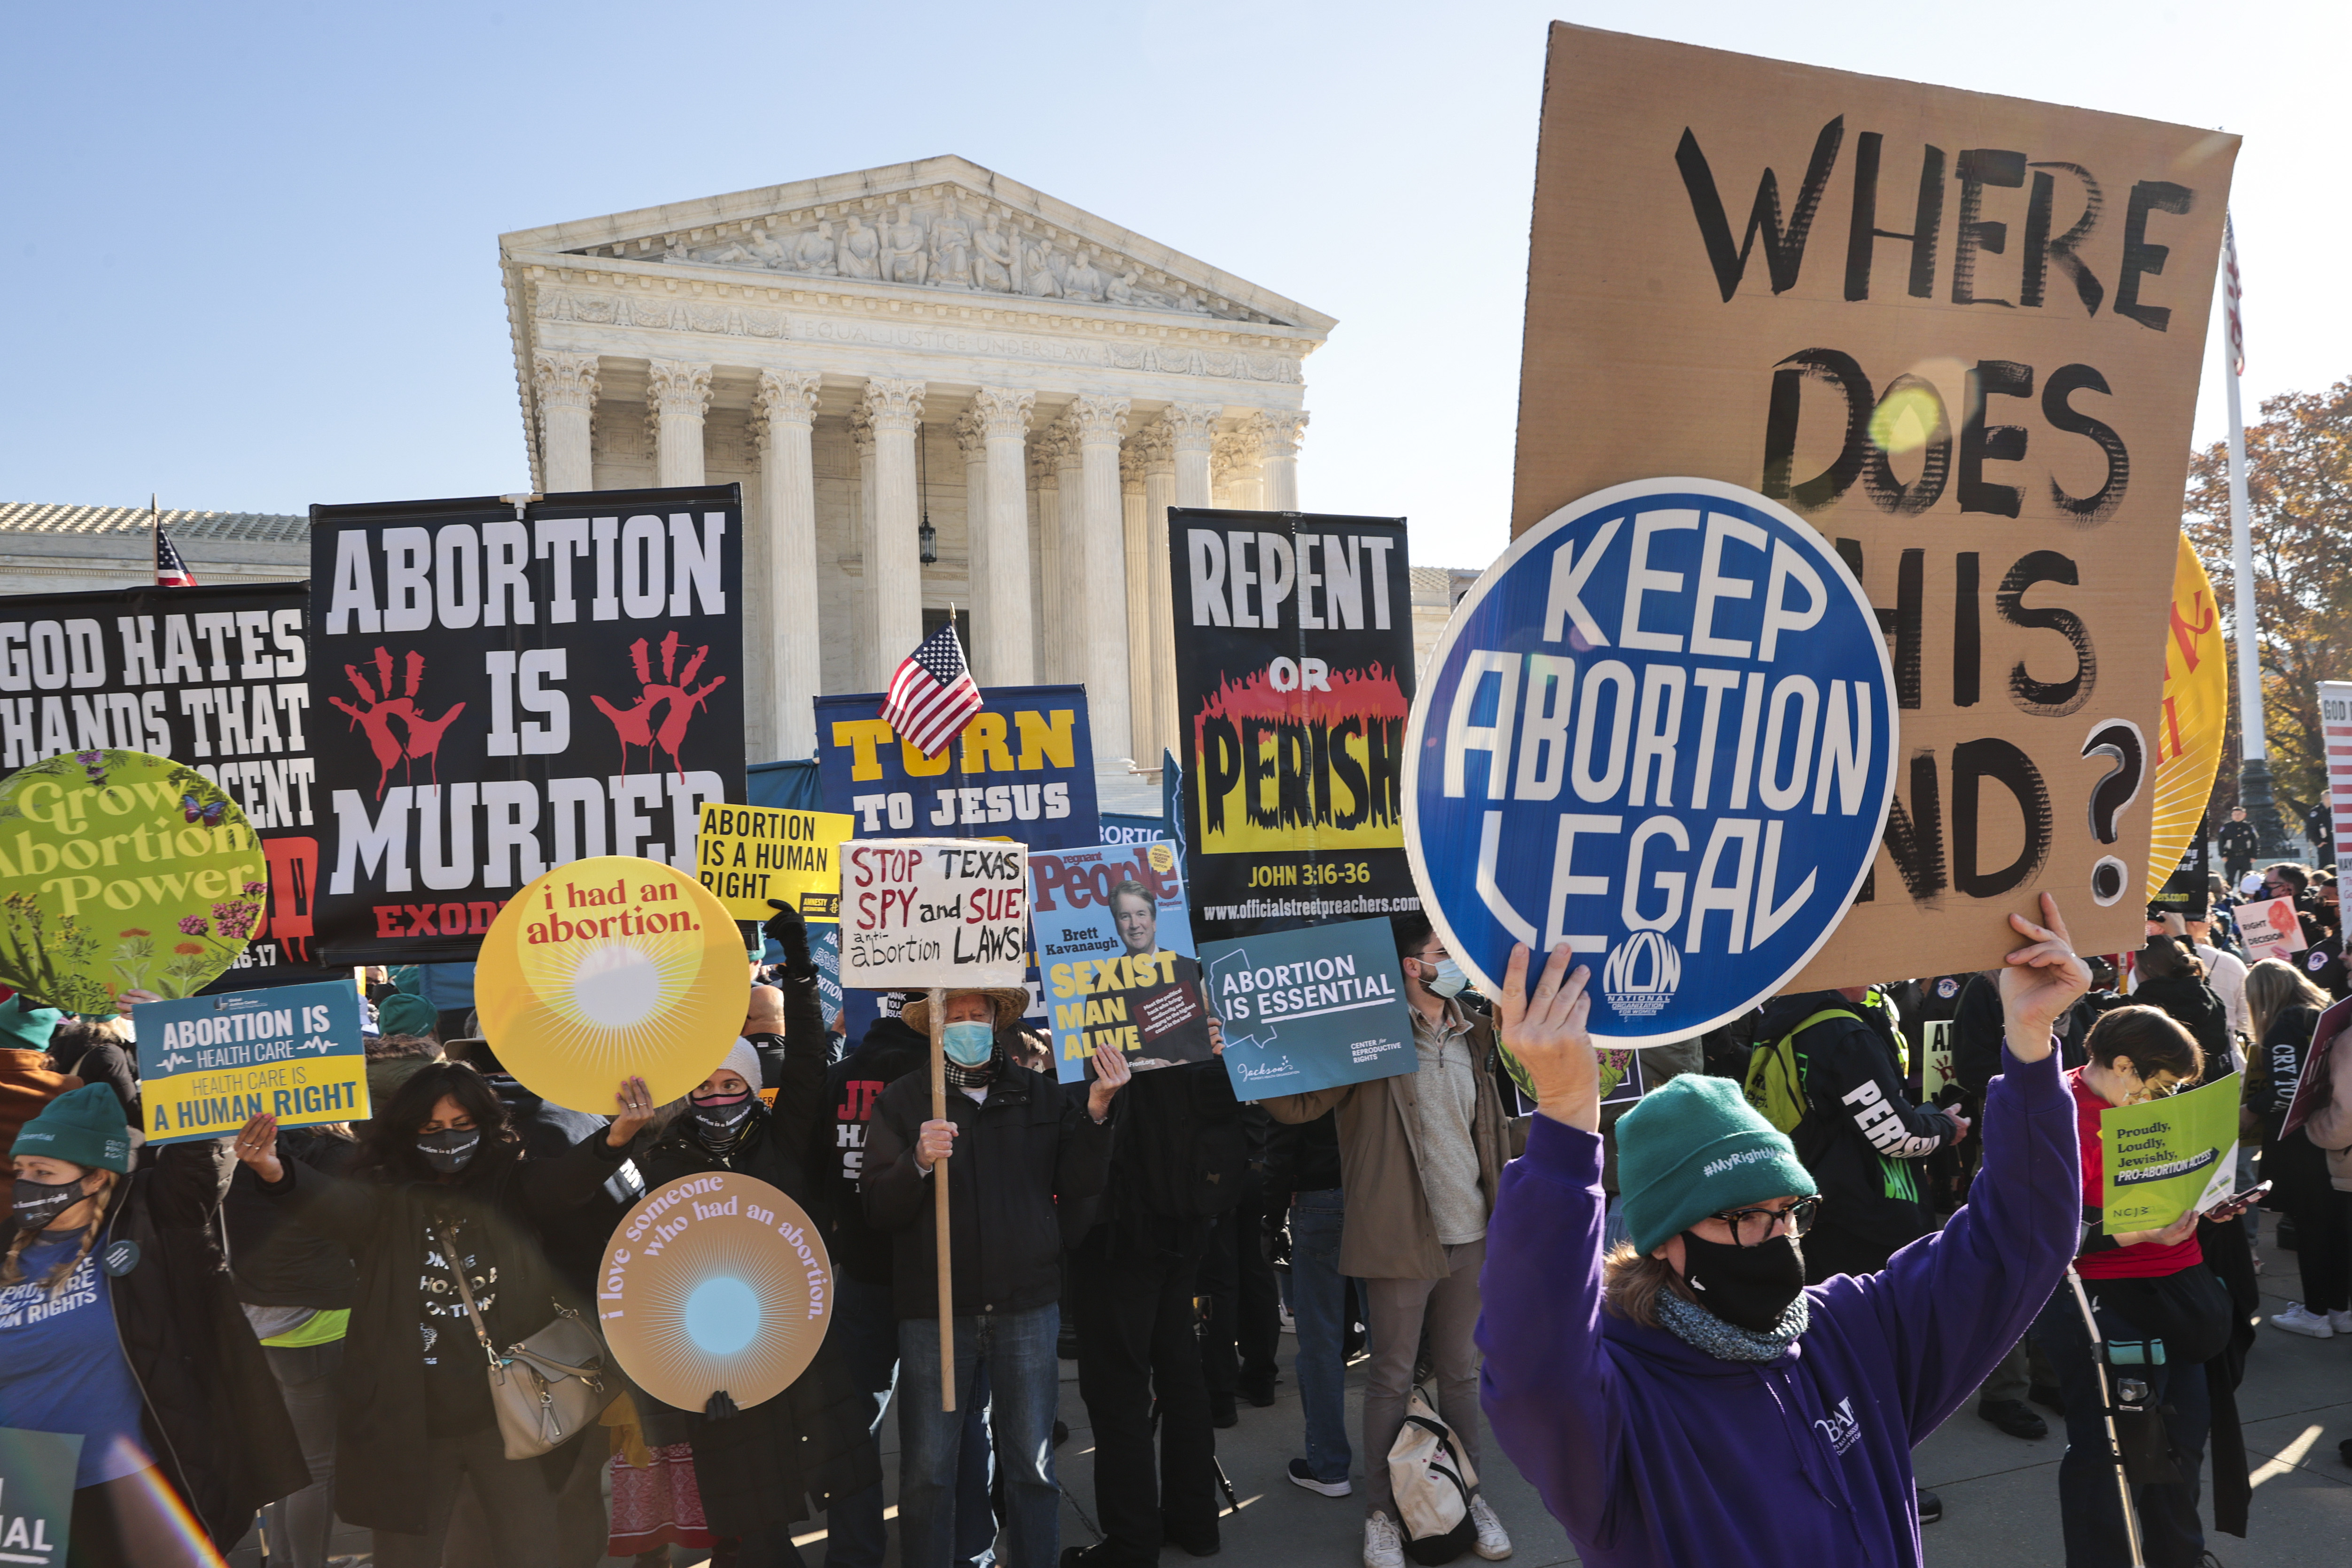 Pro-life and pro-abortion demonstrators gather in front of the US Supreme Court 